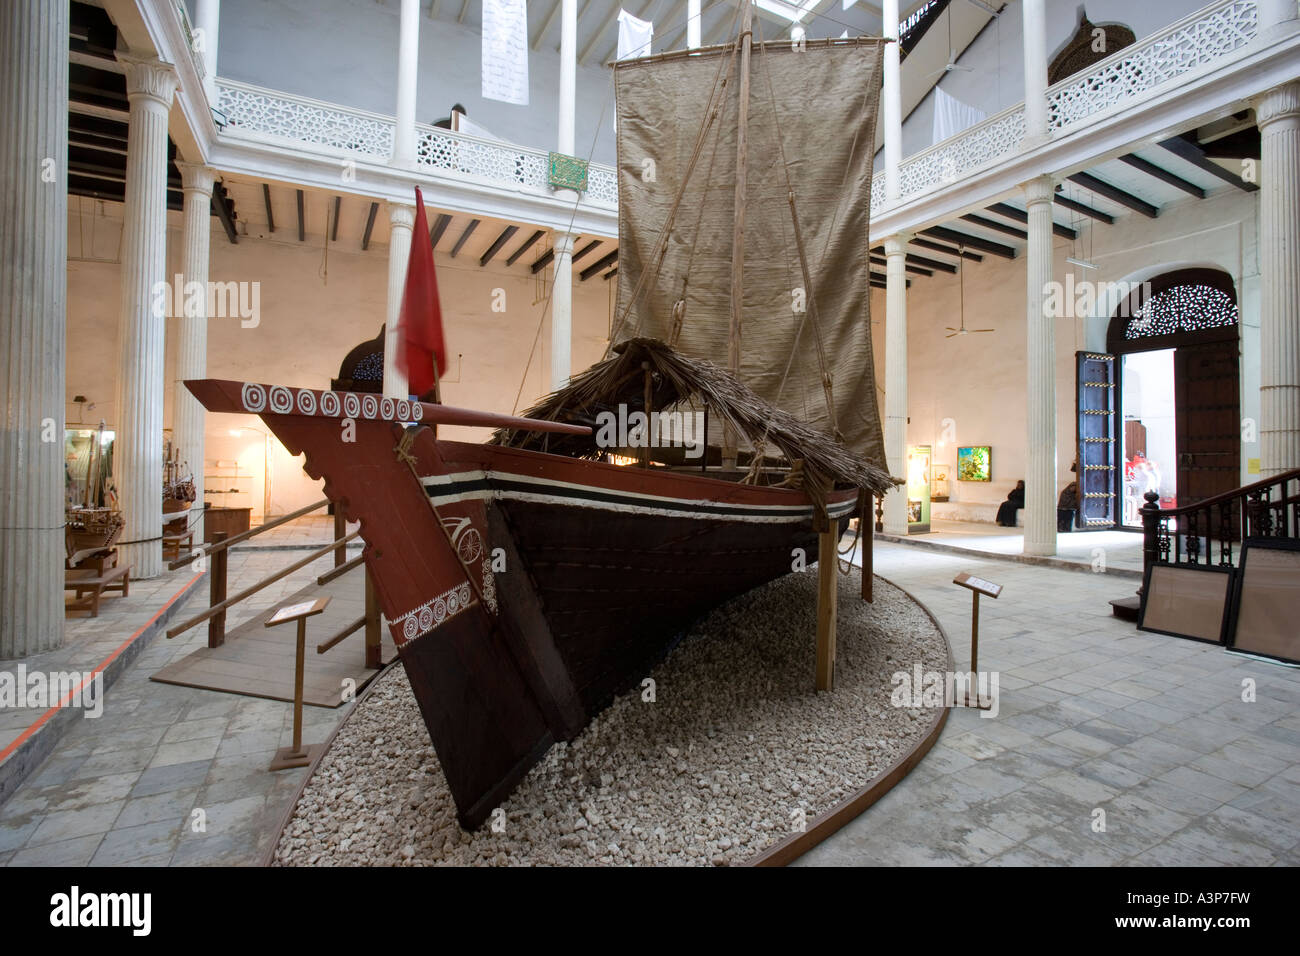 Zanzibar Tanzania A Traditional Dhow boat on dislay inside The House of Wonders National Museum in Stone Town Stock Photo